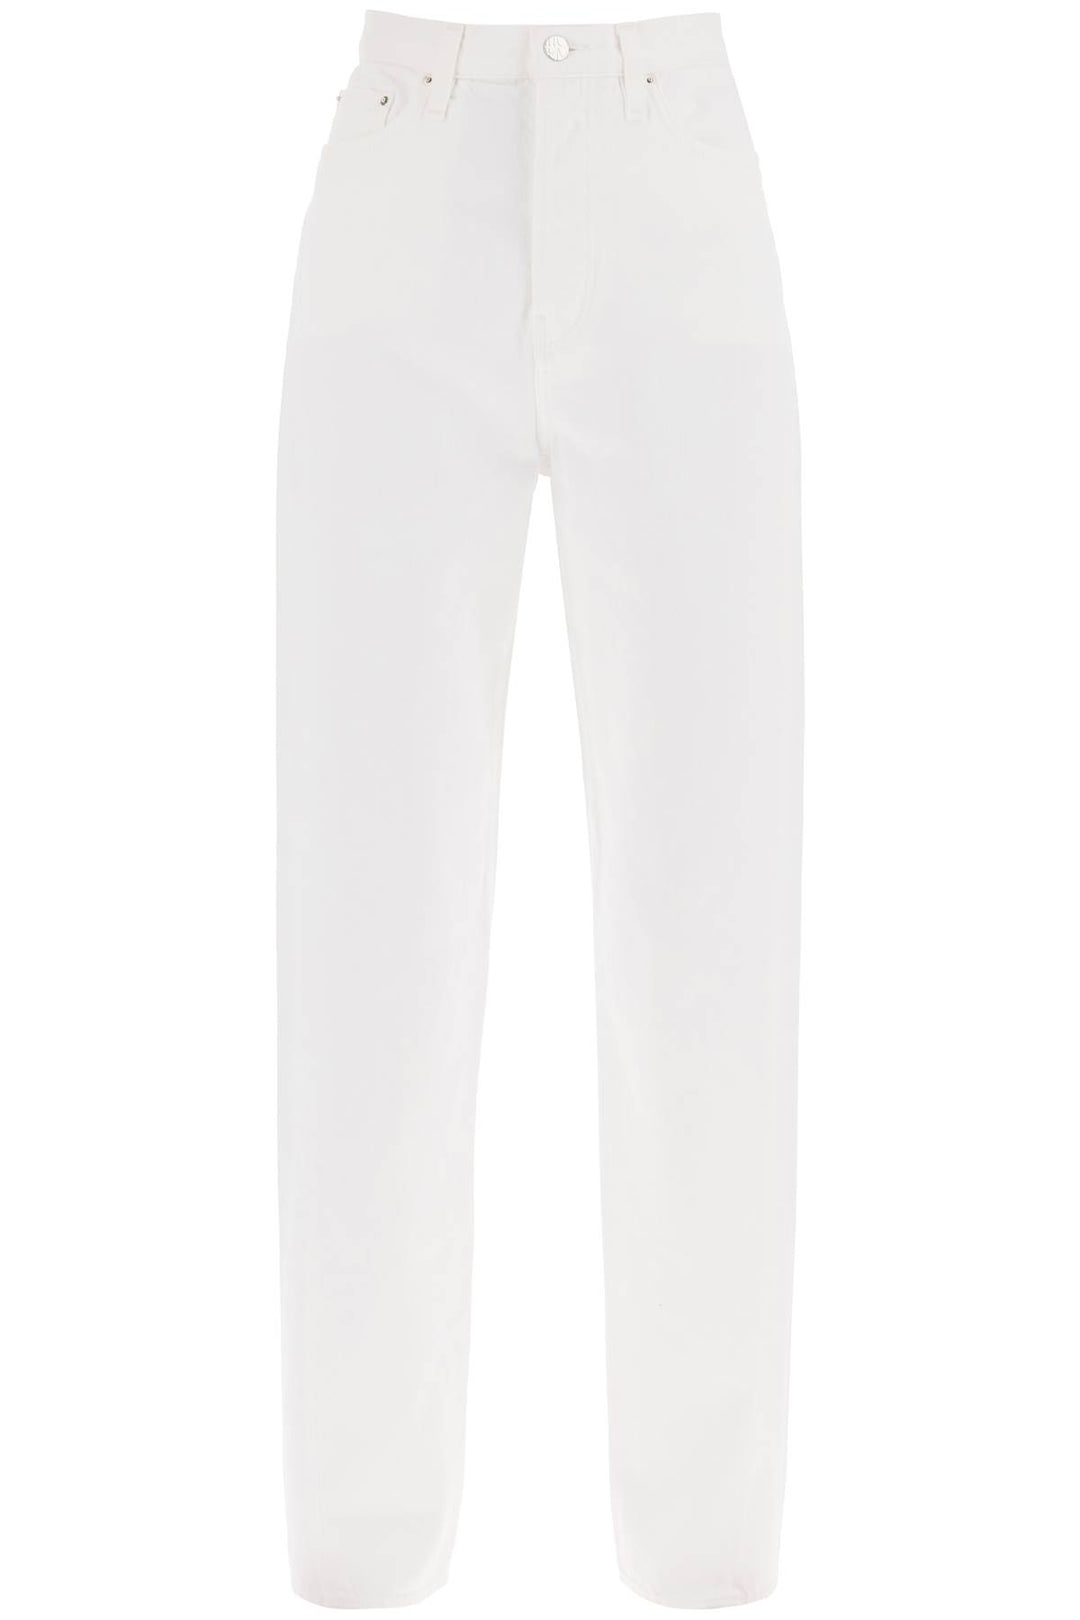 Toteme Twisted Seam Straight Jeans   White